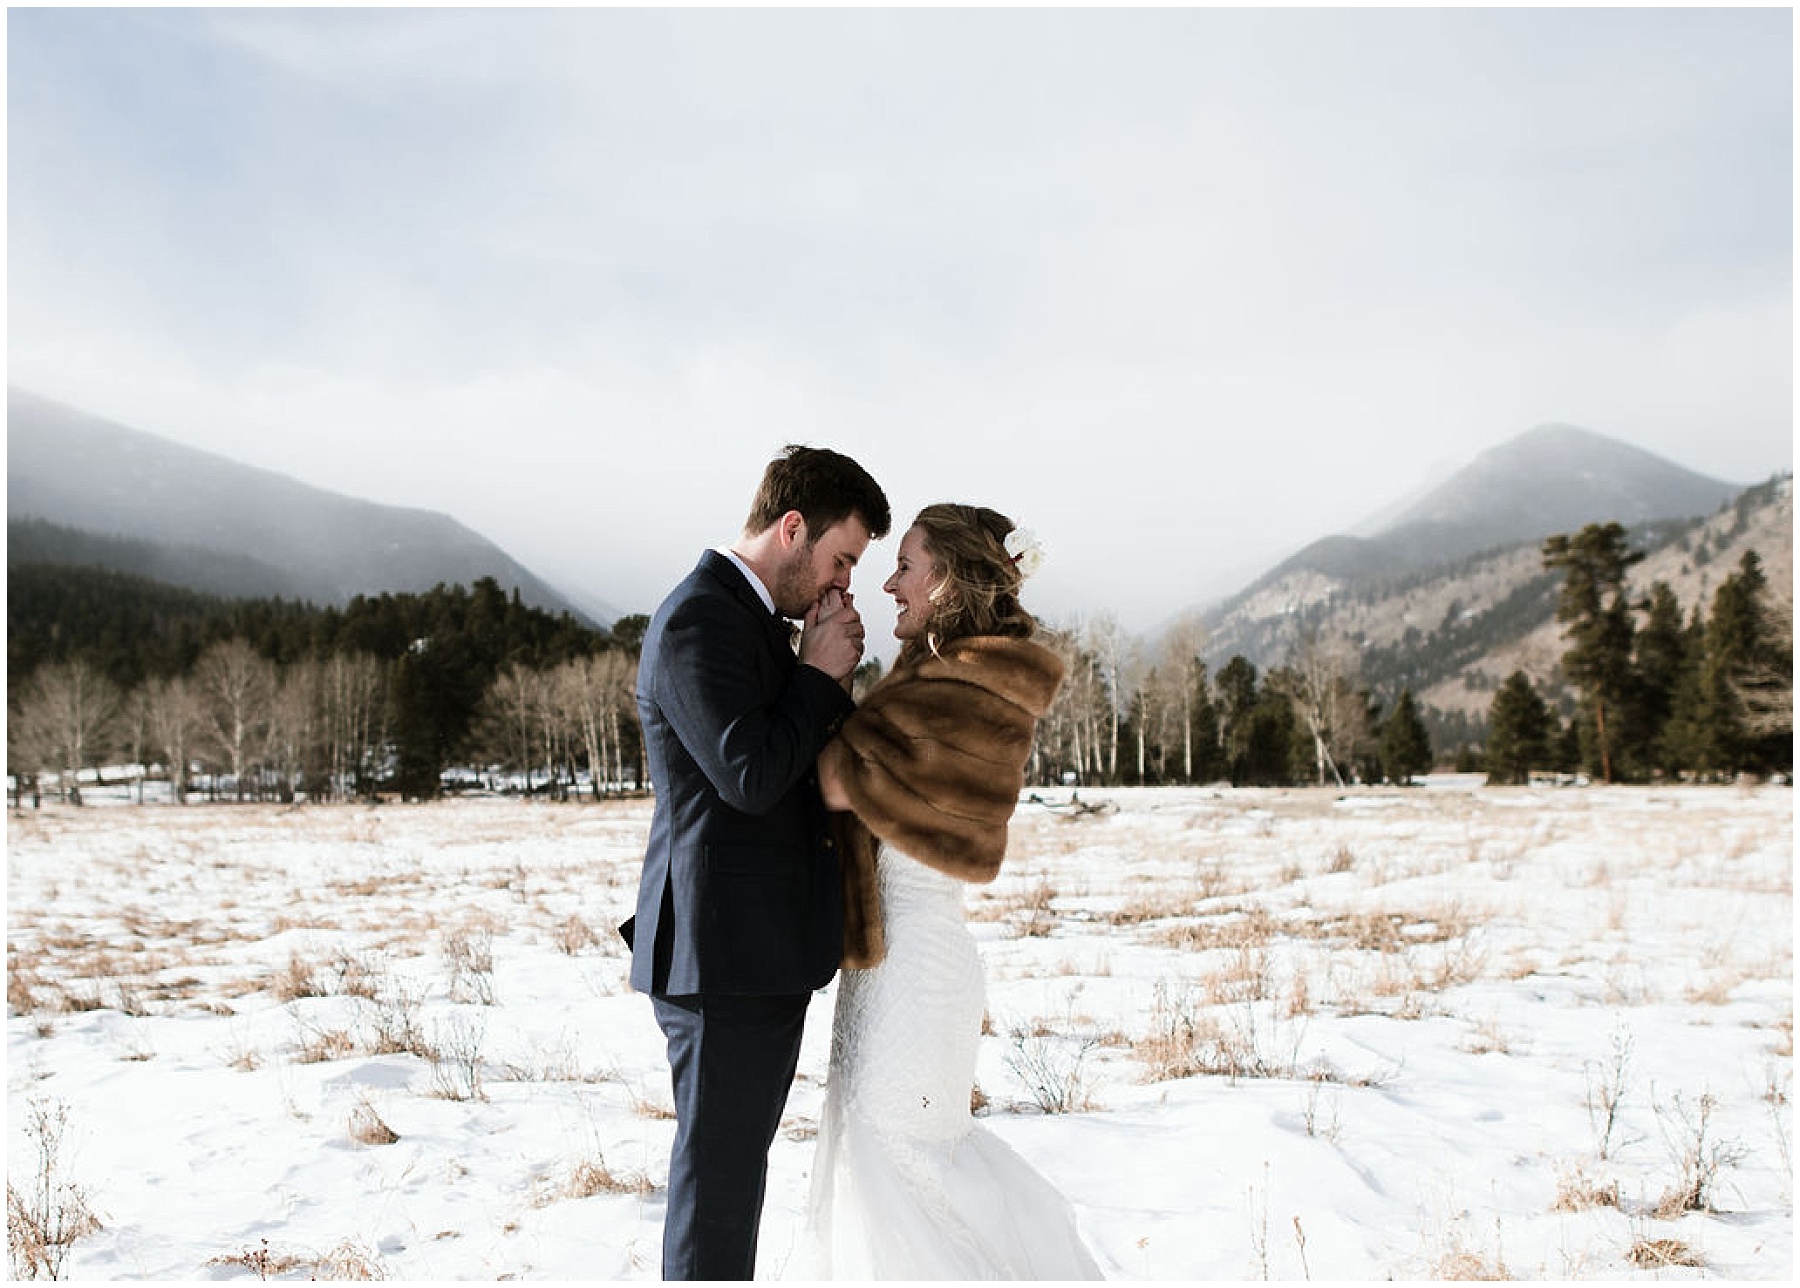 Katesalleyphotography-145_Haley and Dan get married in Estes Park.jpg